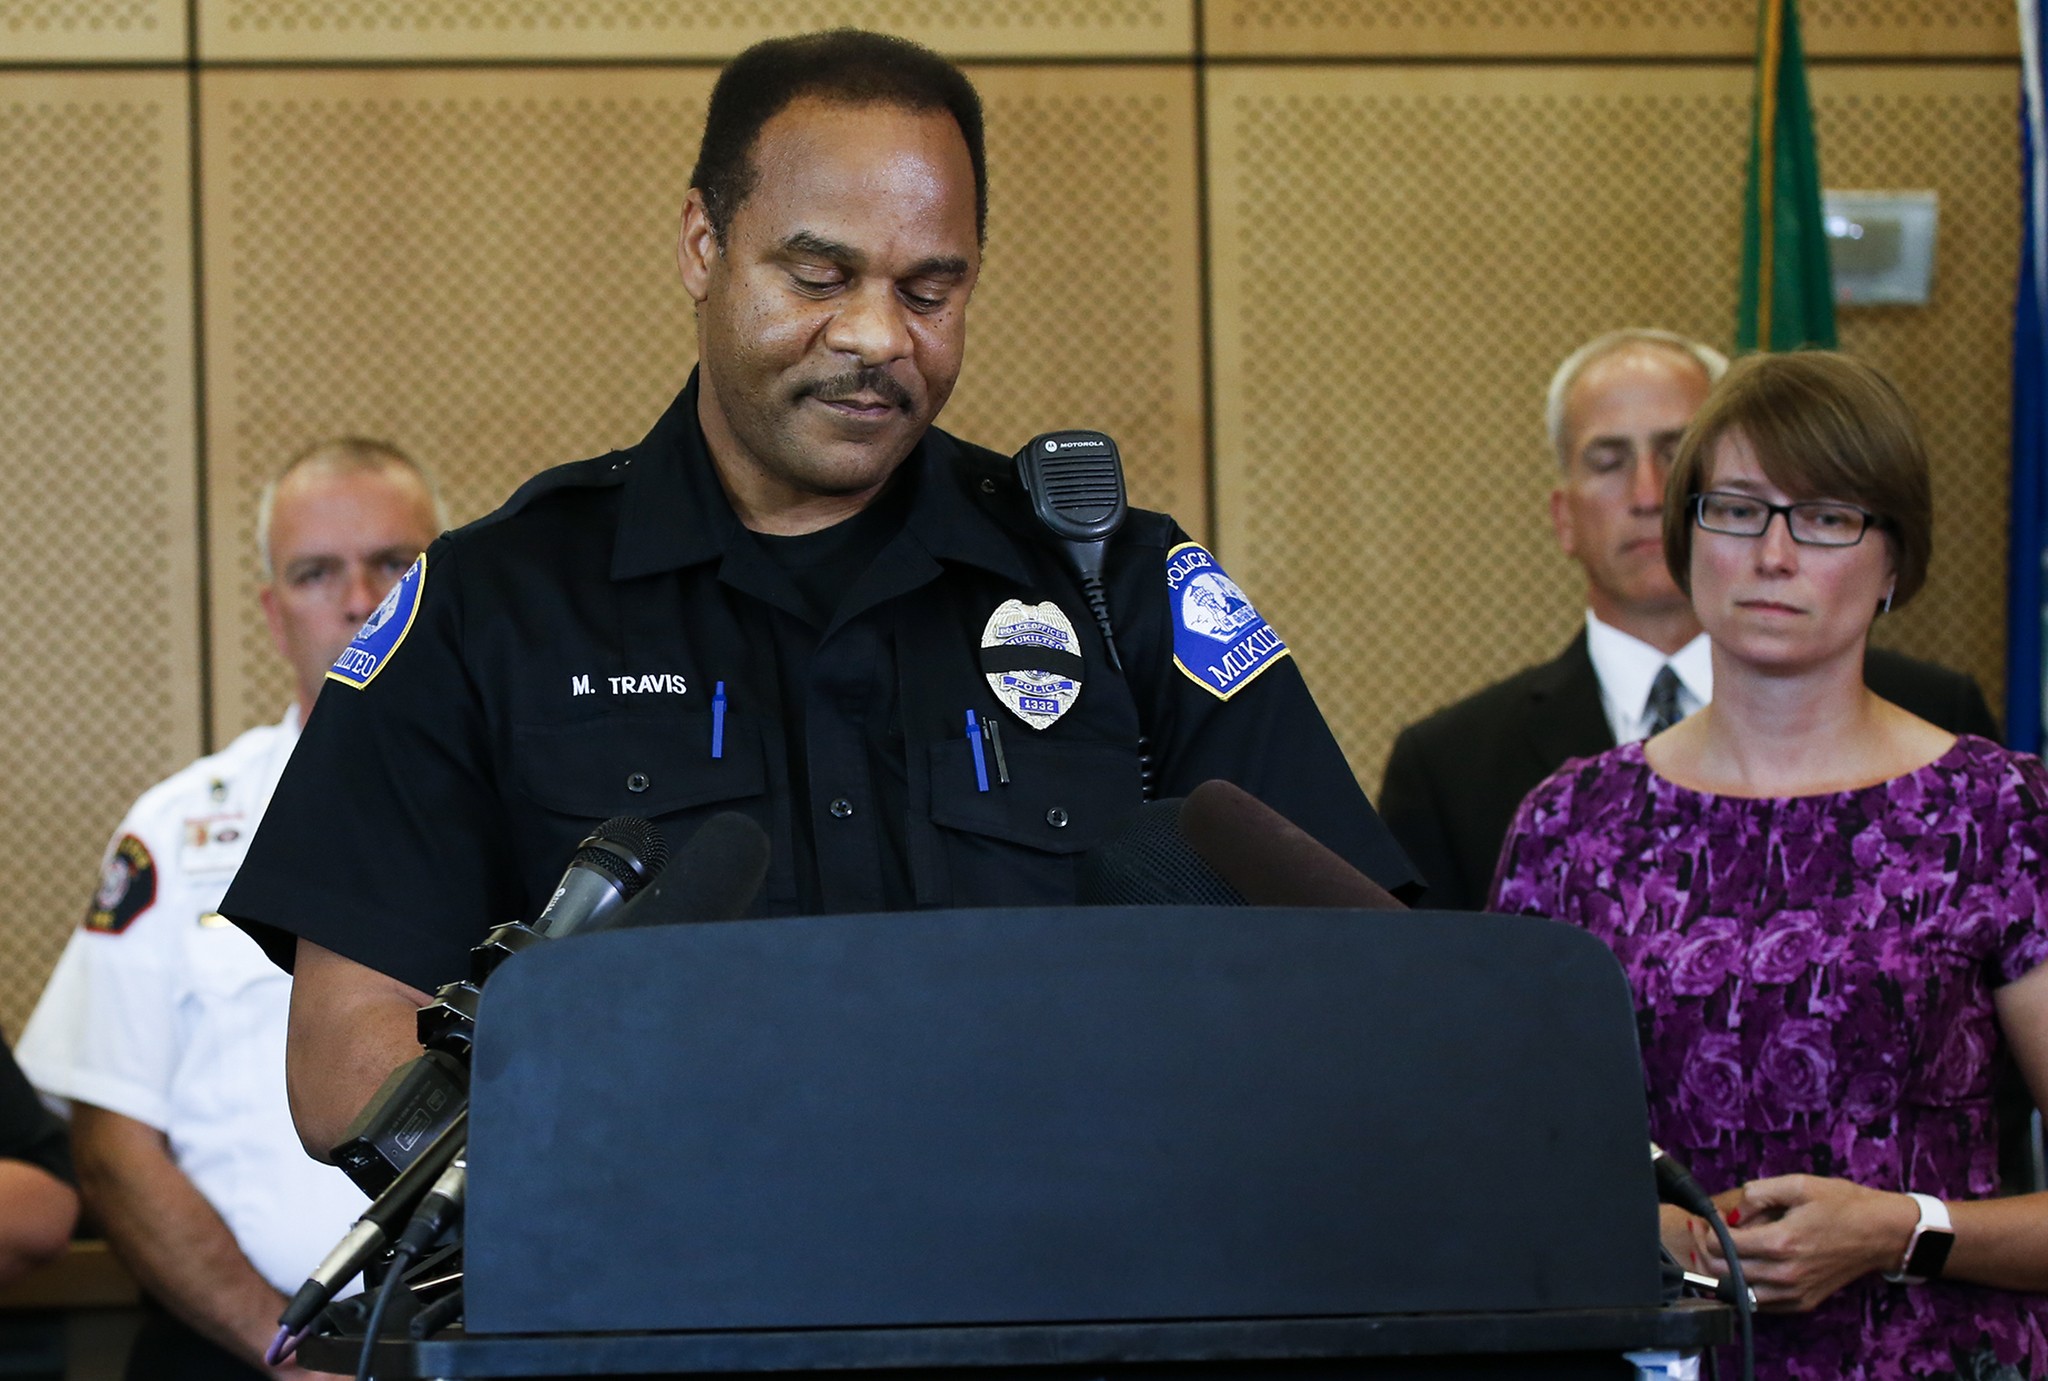 Mukilteo police officer Myron Travis addresses media as Mukilteo Mayor Jennifer Gregerson (right) stands by during a press conference held at Mukilteo City Hall on Saturday afternooon. Three were killed and one was injured following a shooting that occurred early Saturday morning at a home in the Chennault Beach area. (Ian Terry / The Herald)